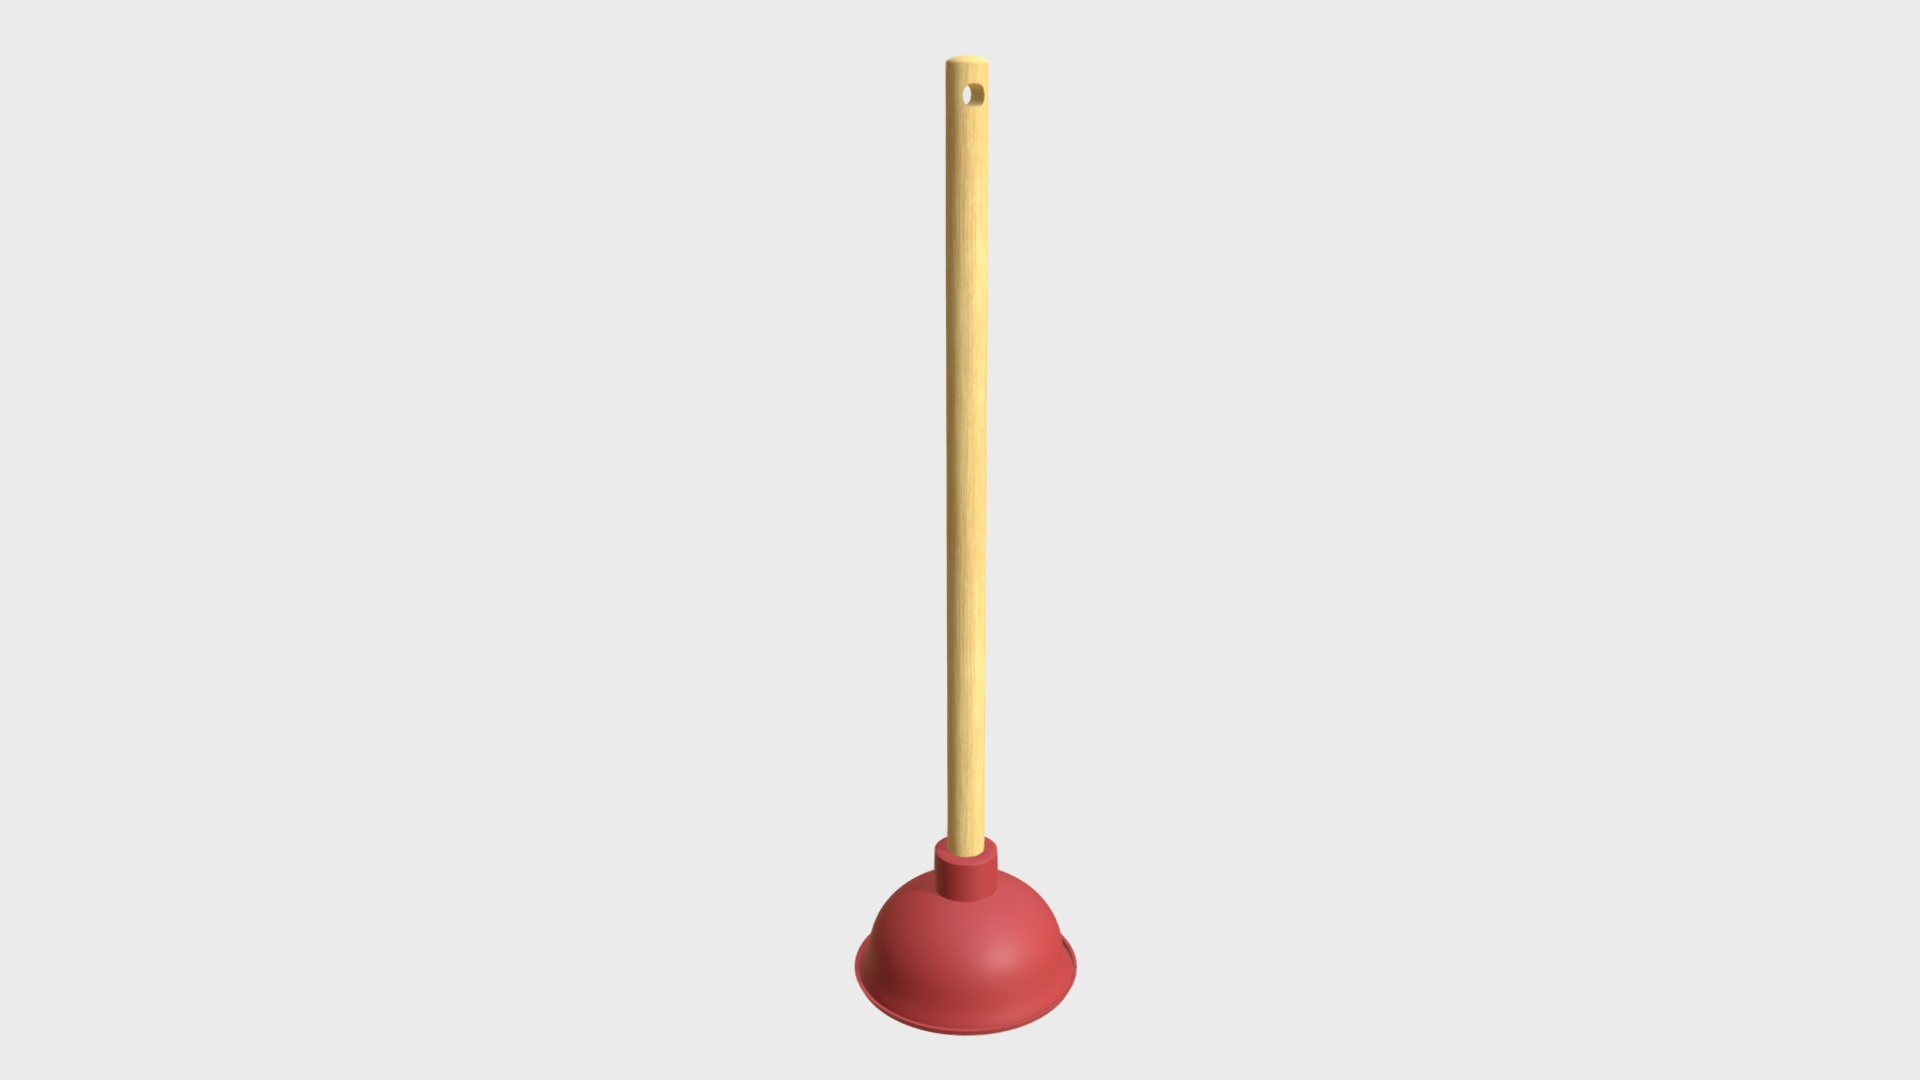 3D model Sink plunger - This is a 3D model of the Sink plunger. The 3D model is about a red and yellow plunger.